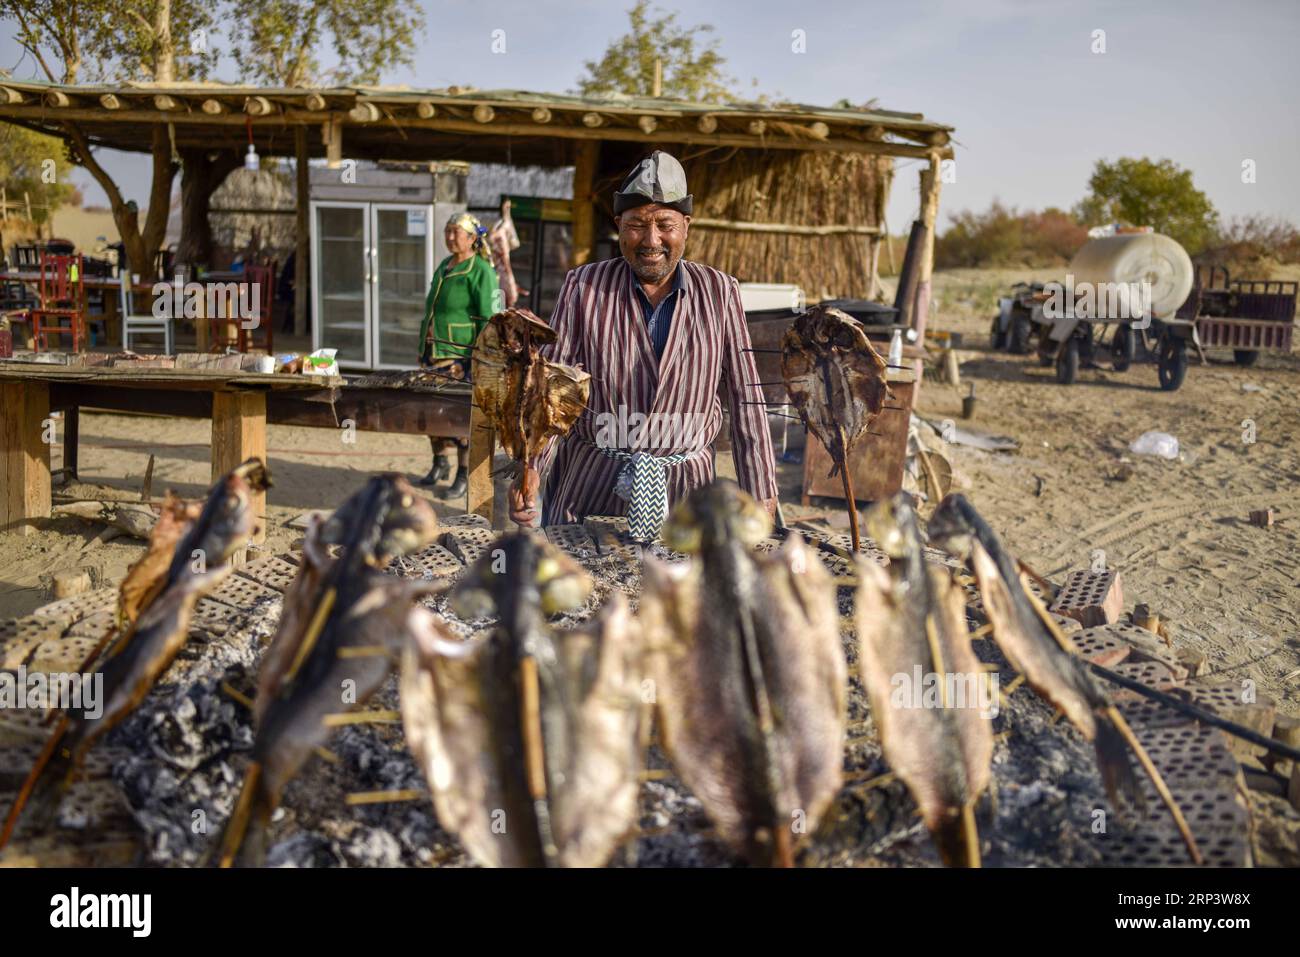 (181017) -- YULI, Oct. 17, 2018 (Xinhua) -- A resident makes roast fish at the Lop Nur People Village of Yuli County, northwest China s Xinjiang Uygur Autonomous Region, Oct. 16, 2018. The Lop Nur people depended basically on fishing for livelihood and developed a distinct culture based on their special lifestyle. Located in Tarim basin, Yuli is known for its natural scenery and ethnic culture and keeps attracting numerous tourists from at home and abroad. From Oct. 1 to 16, 2018, Yuli County has received more than 230,000 visitors, with a year-on-year increase of 31.46 percent. (Xinhua/Zhao G Stock Photo